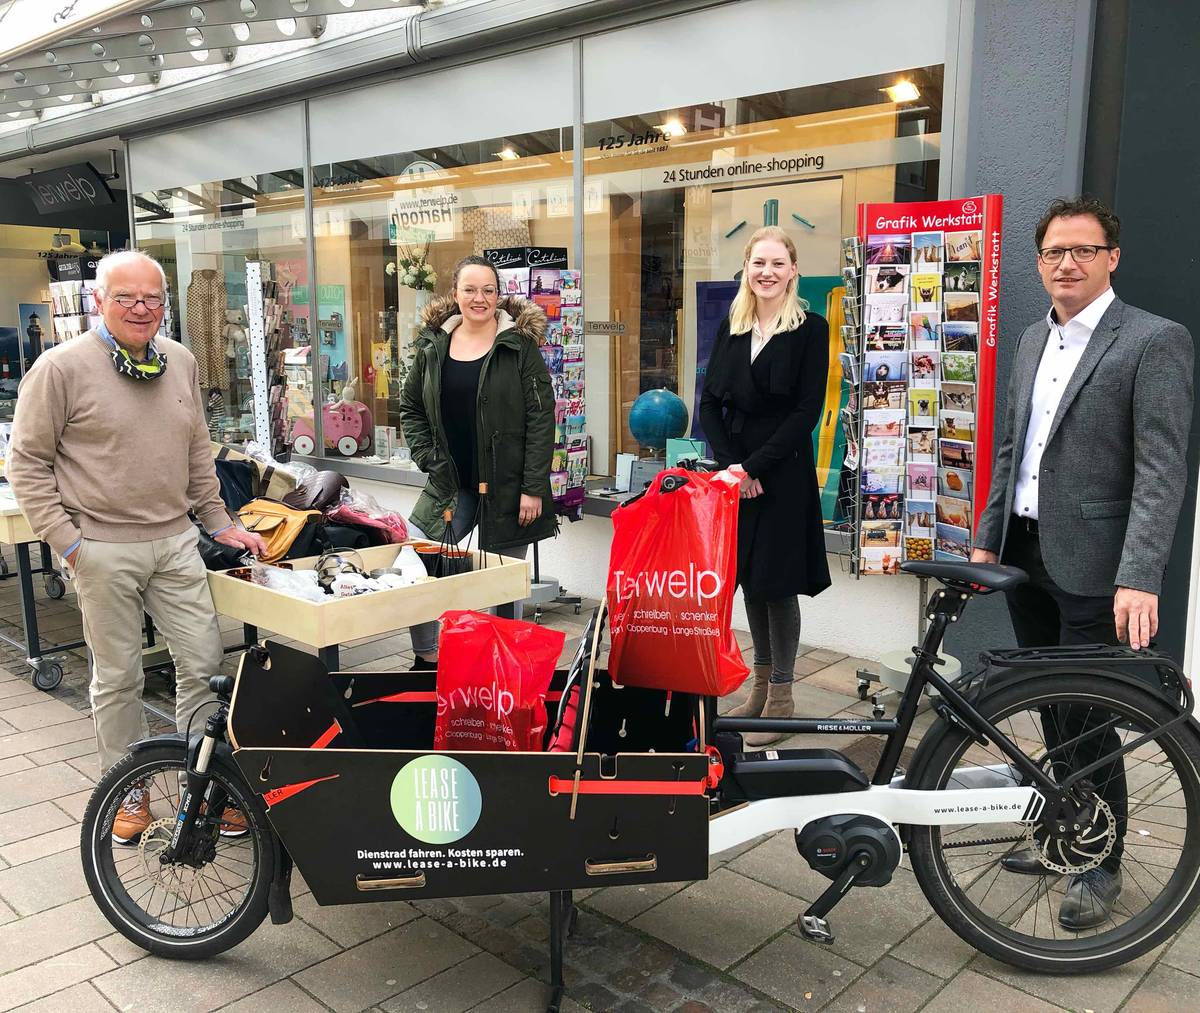 Four people with cargo bike in front of book shop Terwelp